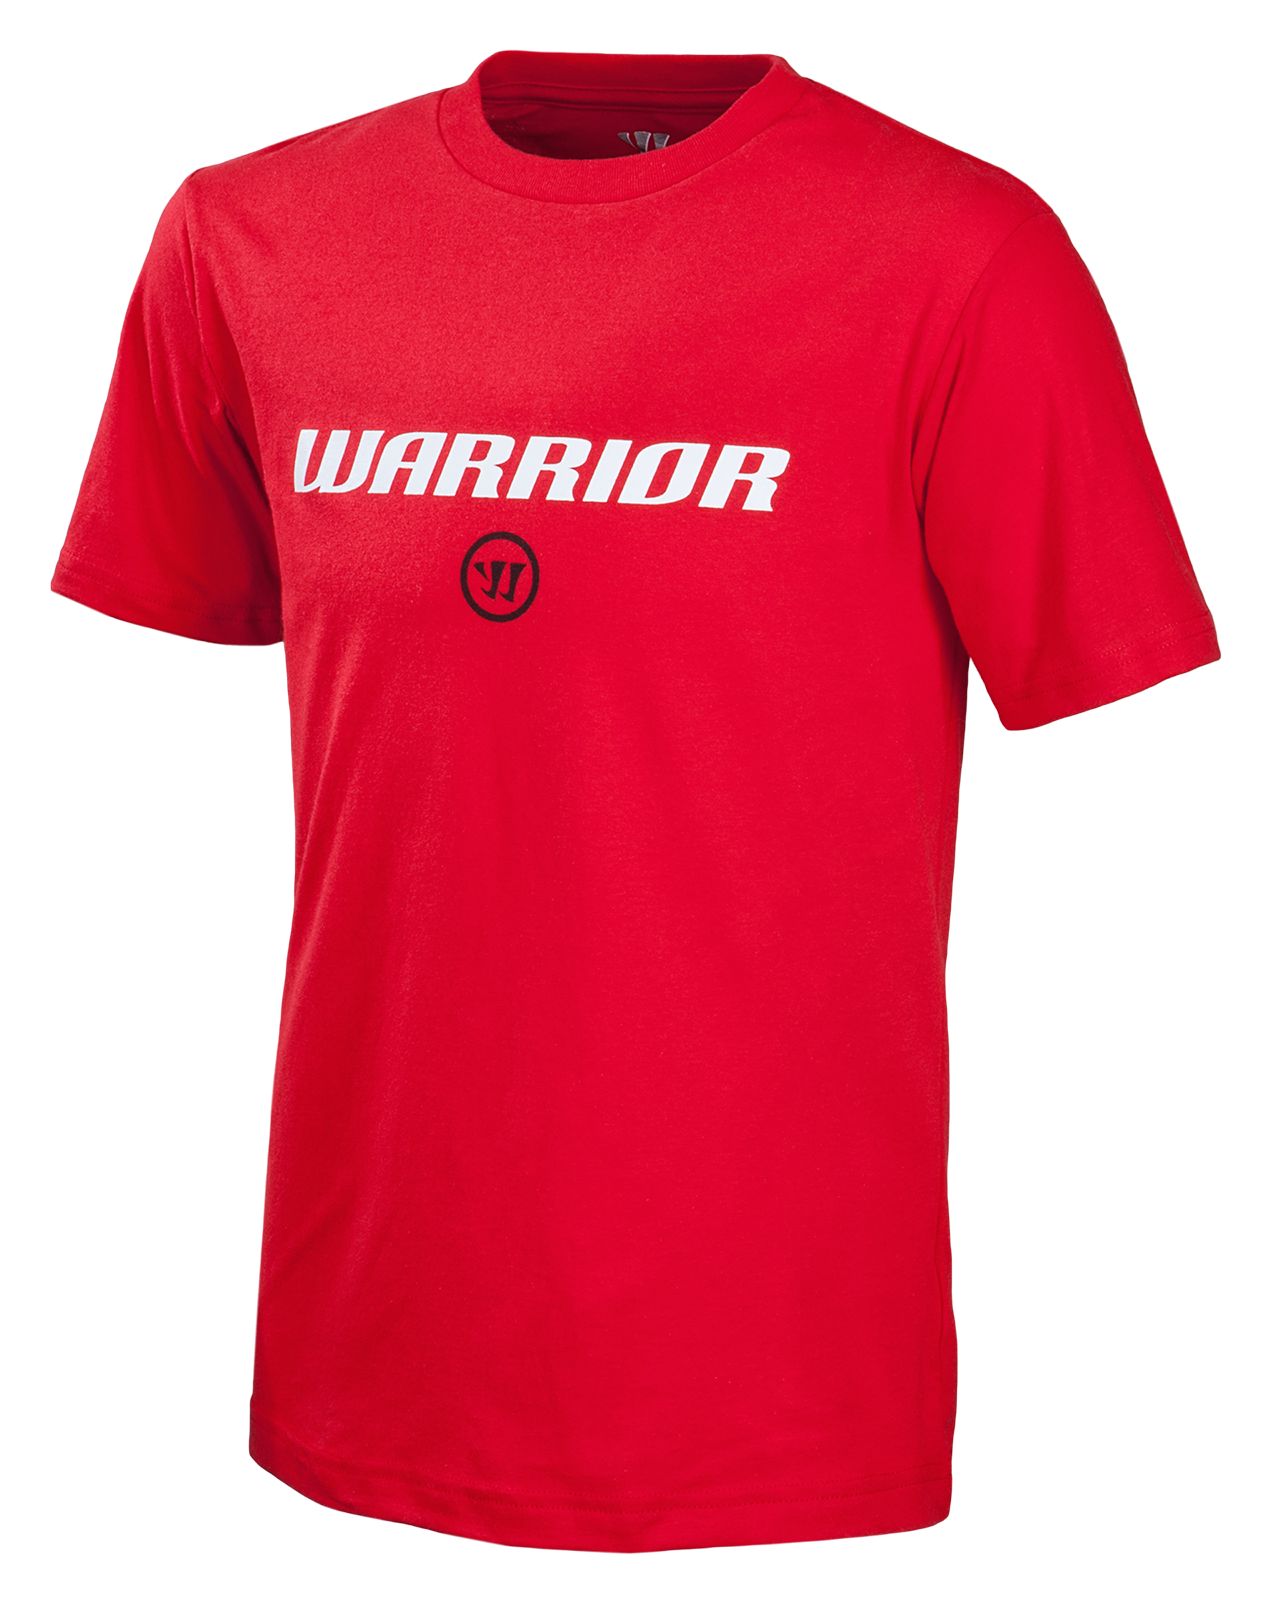 Youth Warrior Logo Tee, Red image number 1